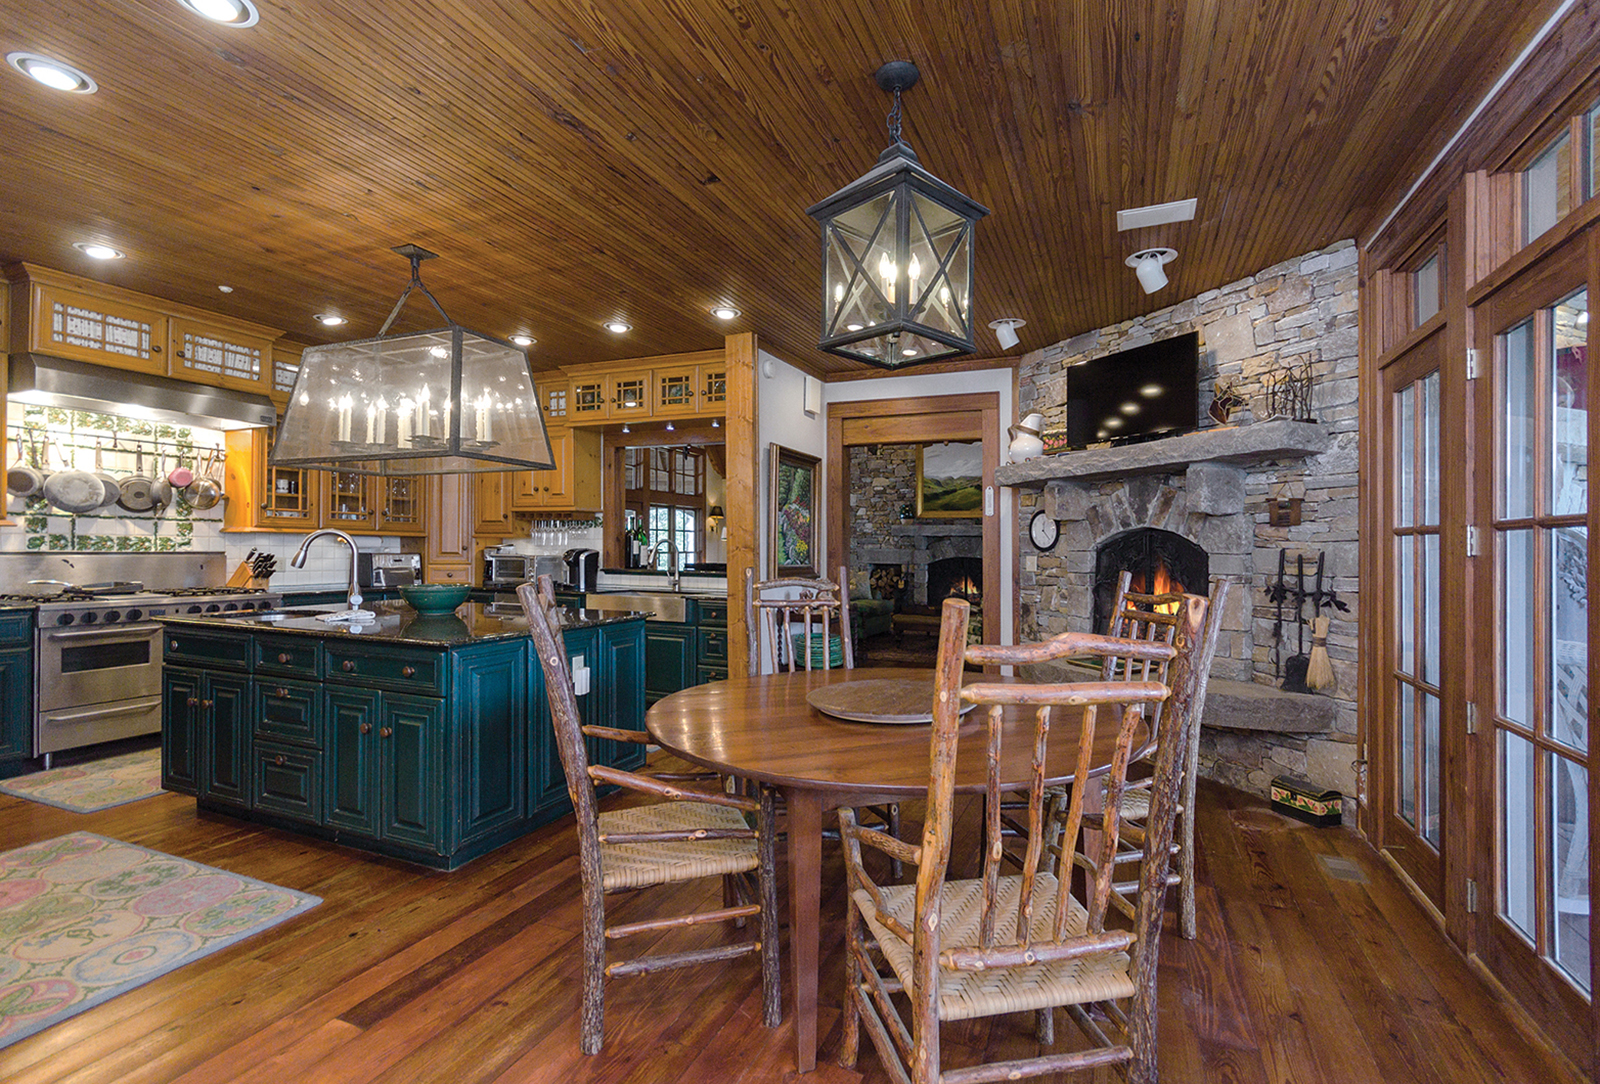 Home for sale in Cashiers NC - Kitchen